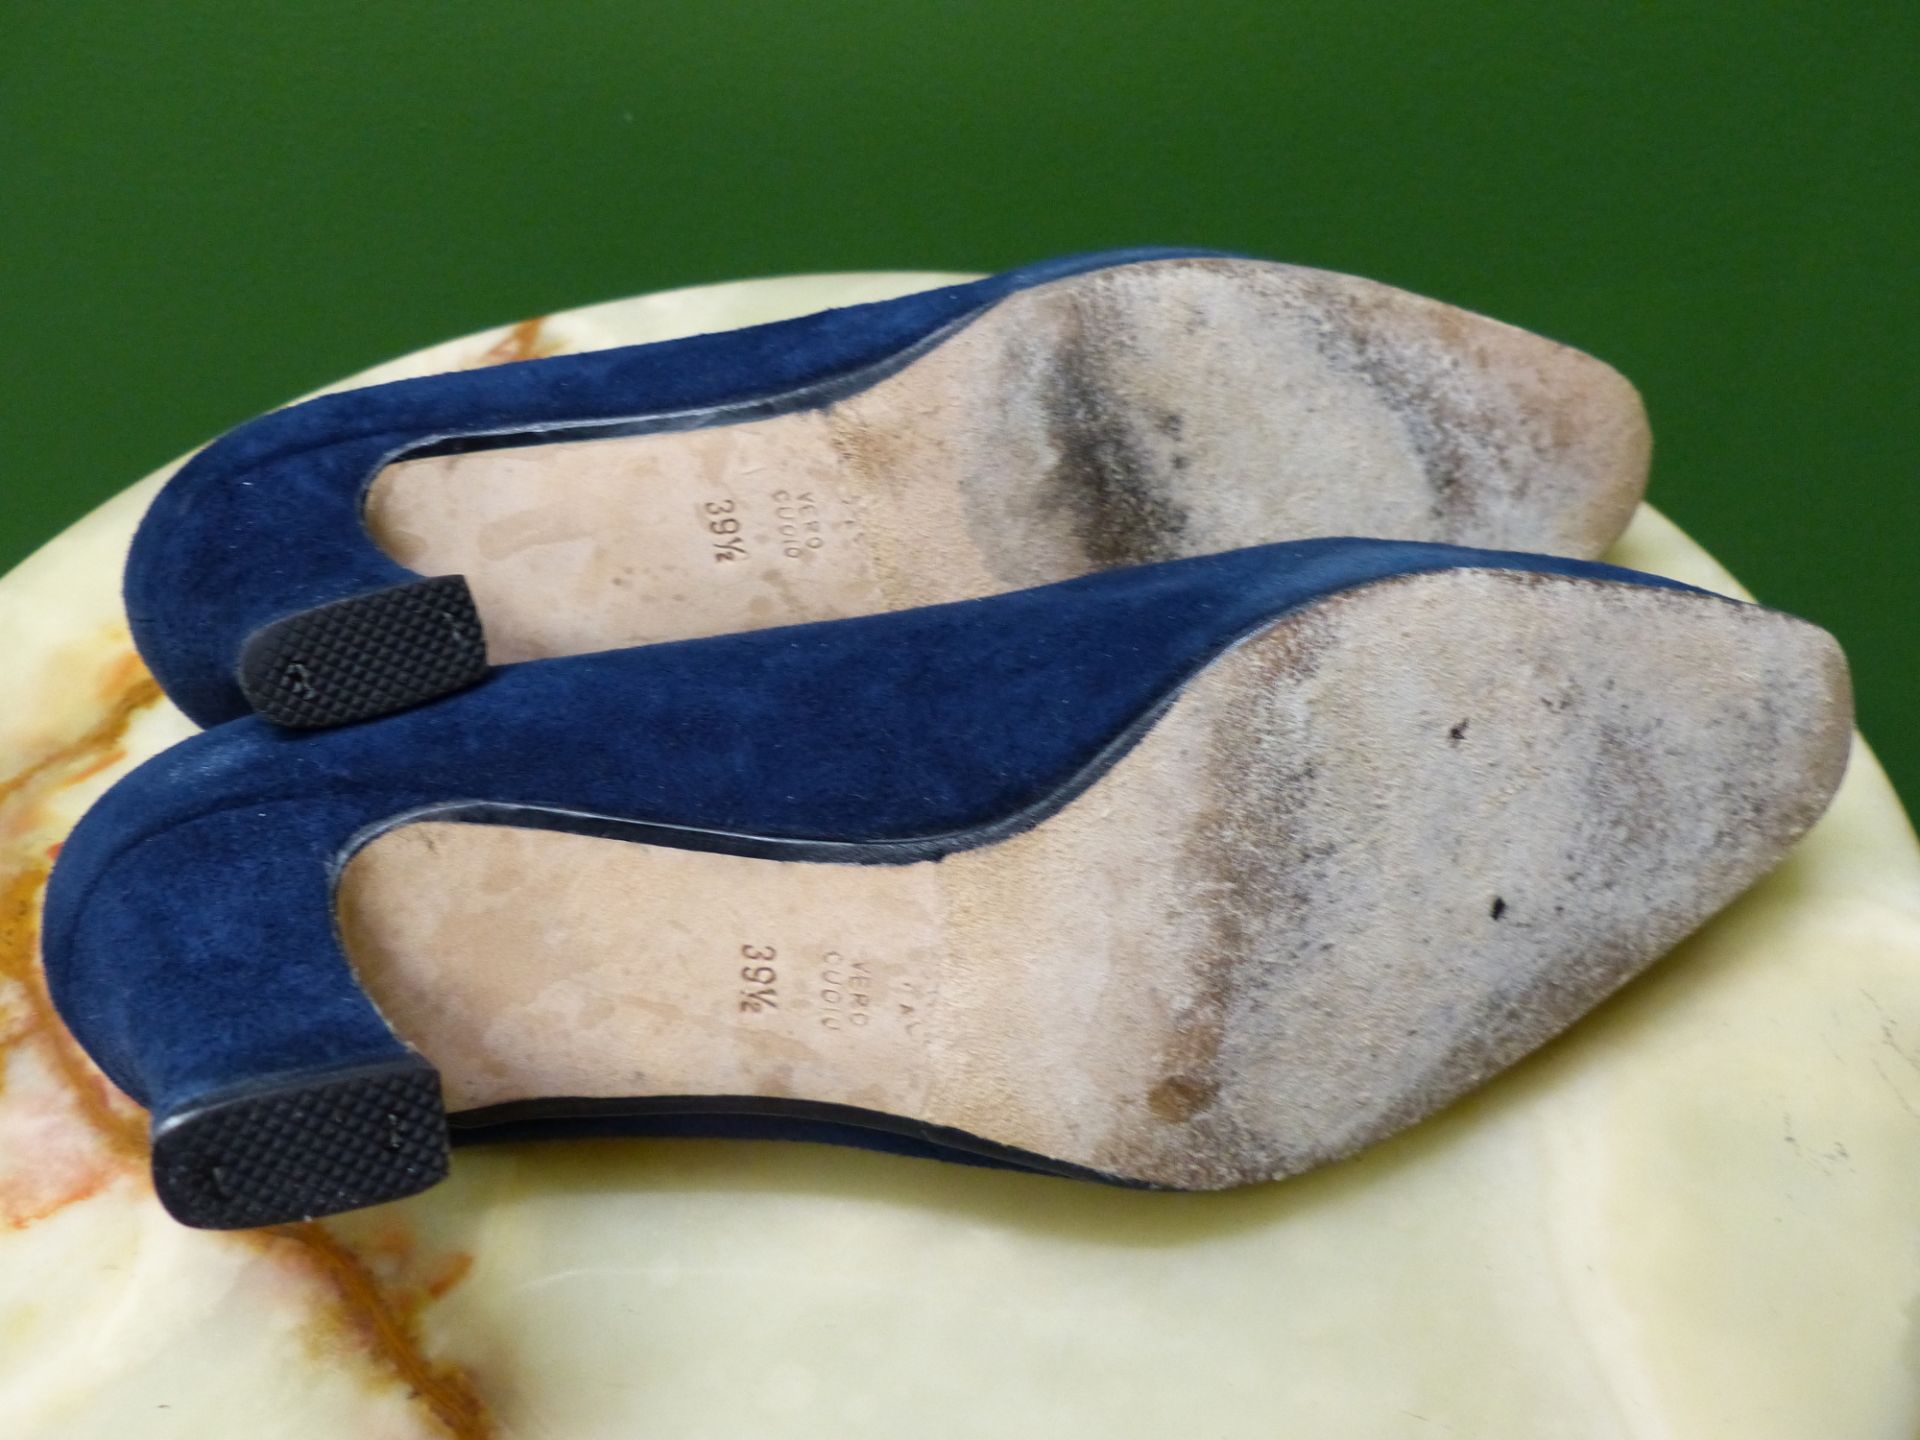 SHOES. SUTOR MANTELLASSI BROWN LEATHER HEALED EUR SIZE 39.5 (BOXED) TOGETHER WITH CHICCA LONDON BLUE - Image 9 of 9